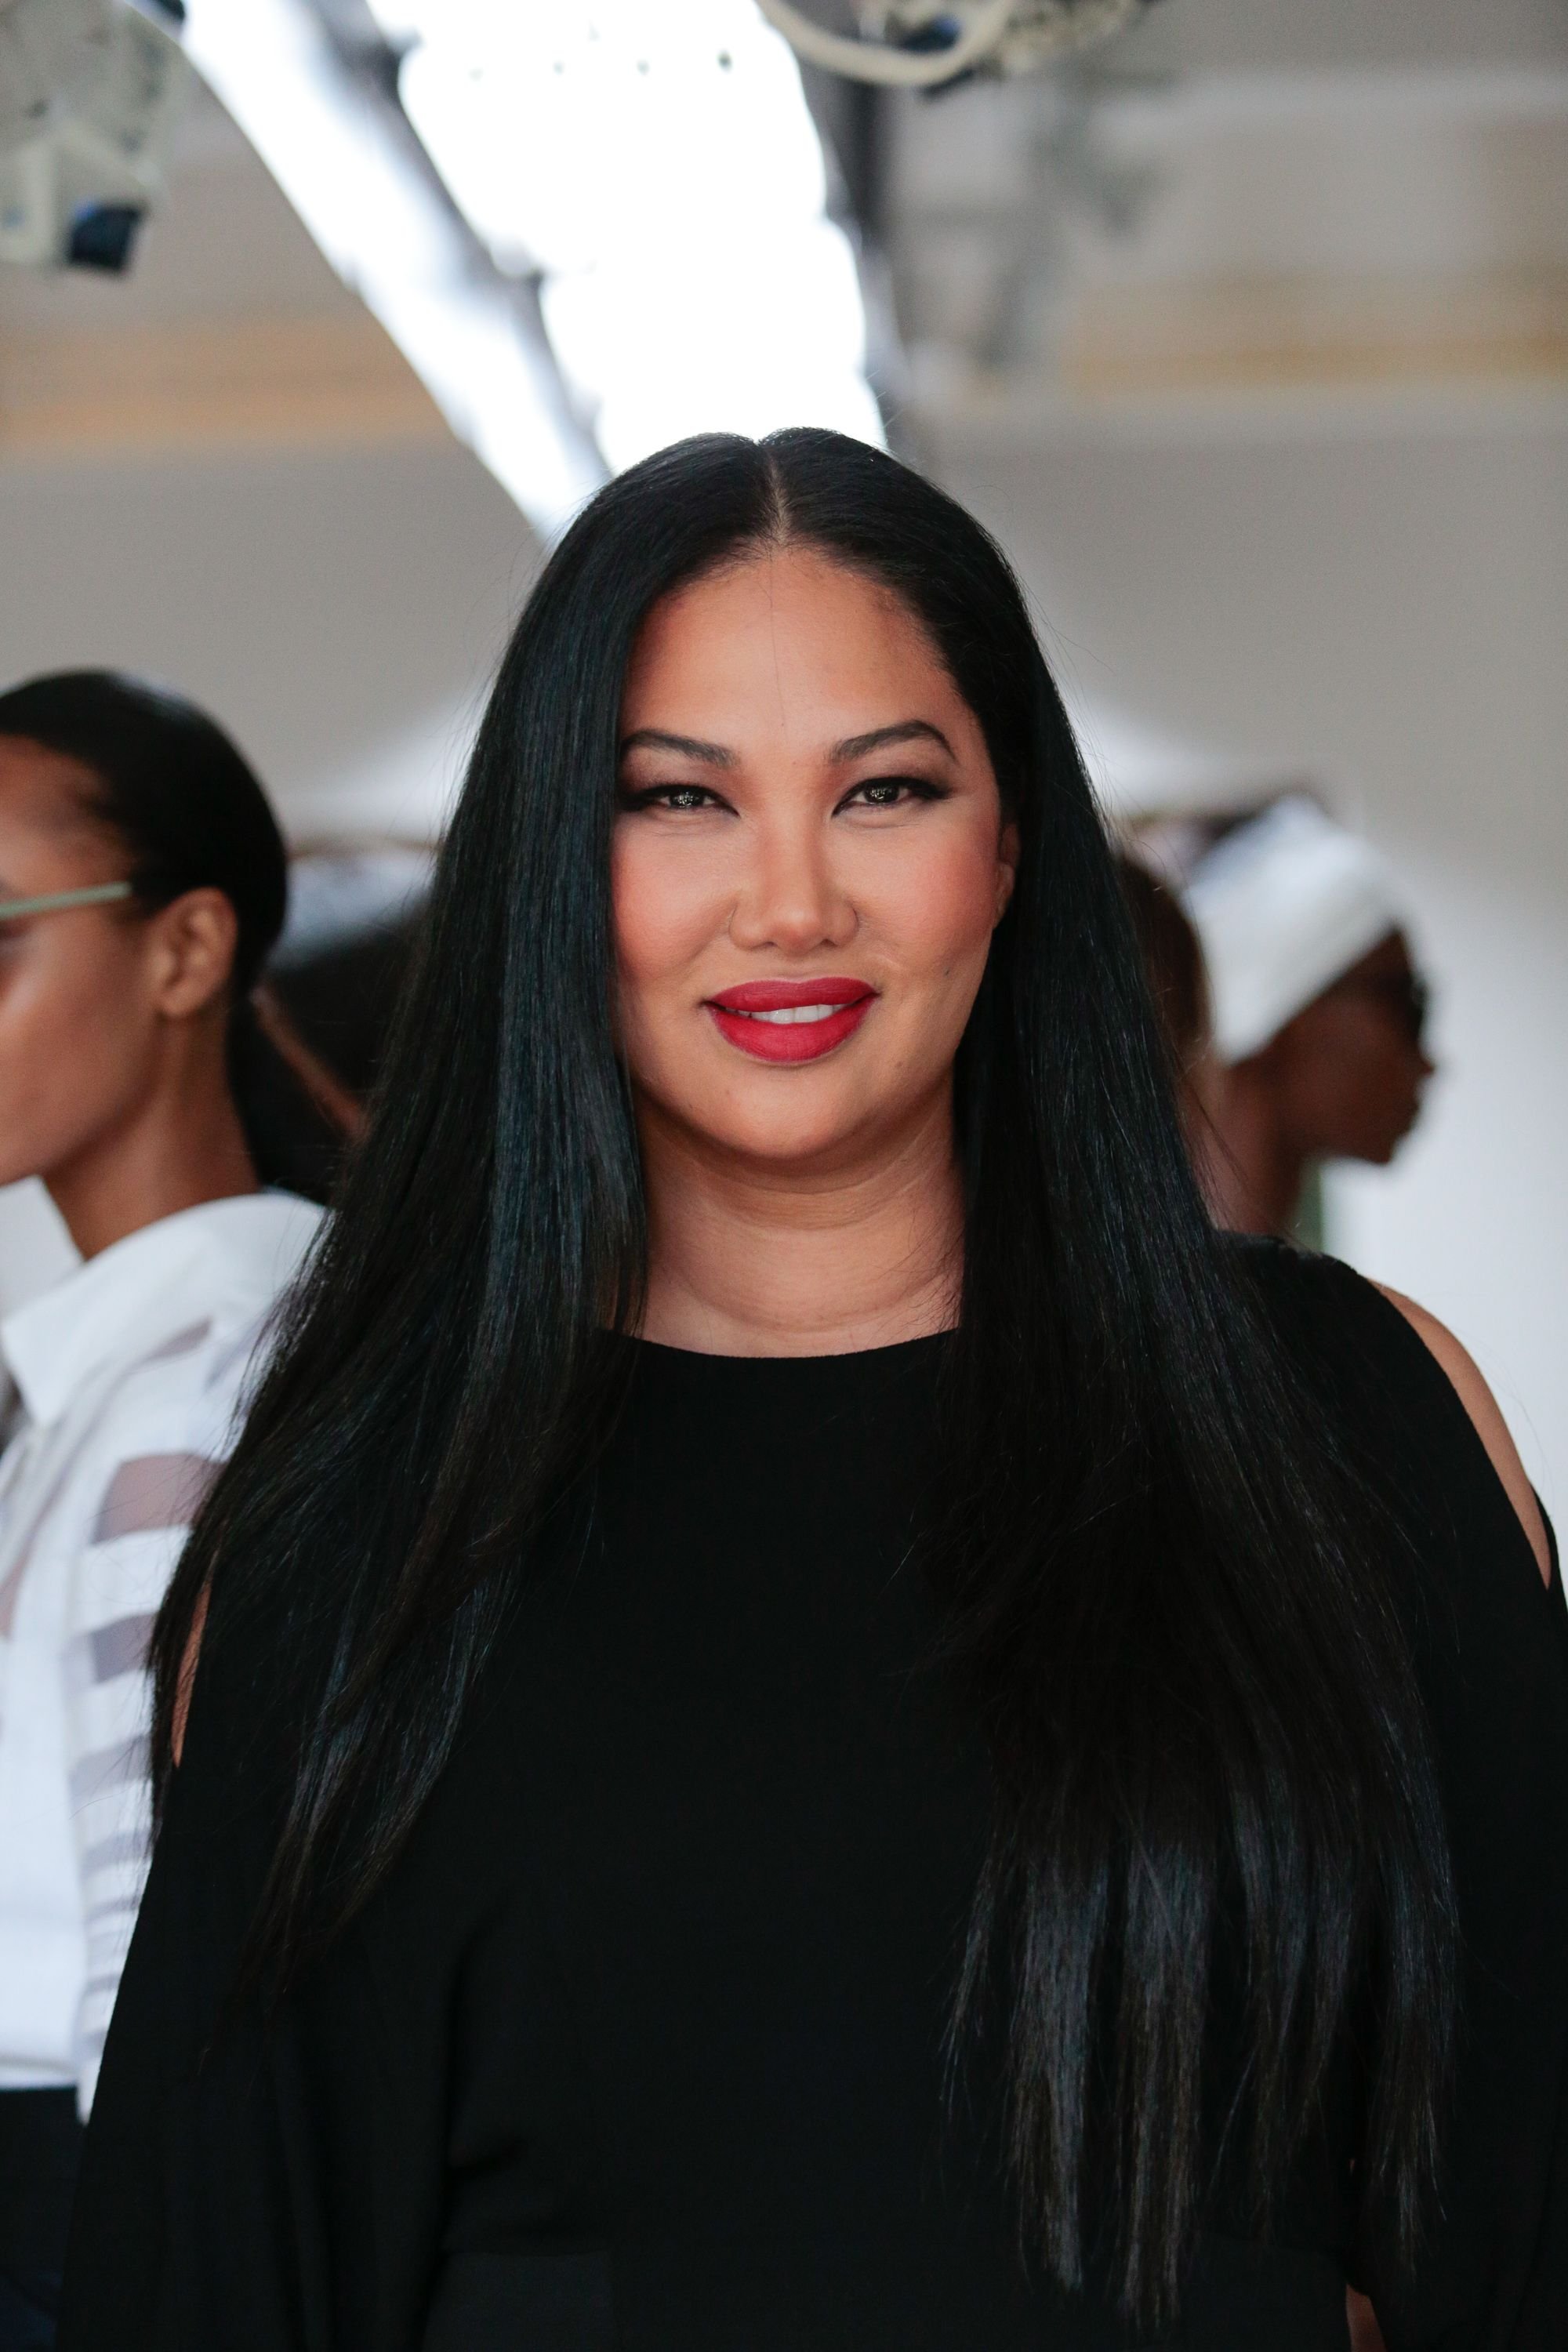 Kimora Lee Simmons attends the New York Fashion Week at The Gallery, Skylight at Clarkson Square on September 14, 2016 | Photo: Getty Images